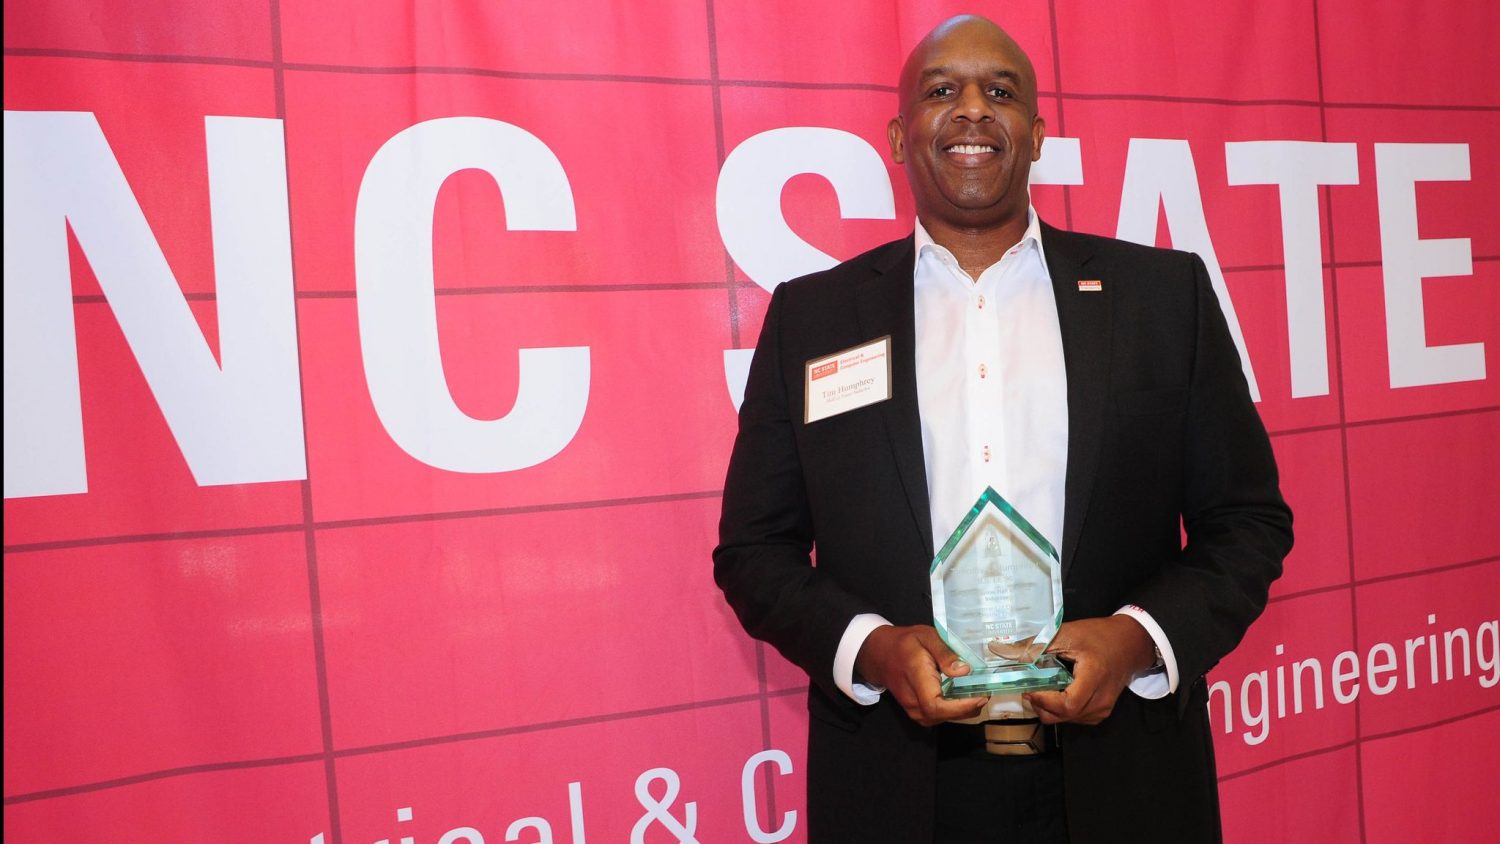 Tim Humphrey holding his Hall of Fame statuette in front of red background